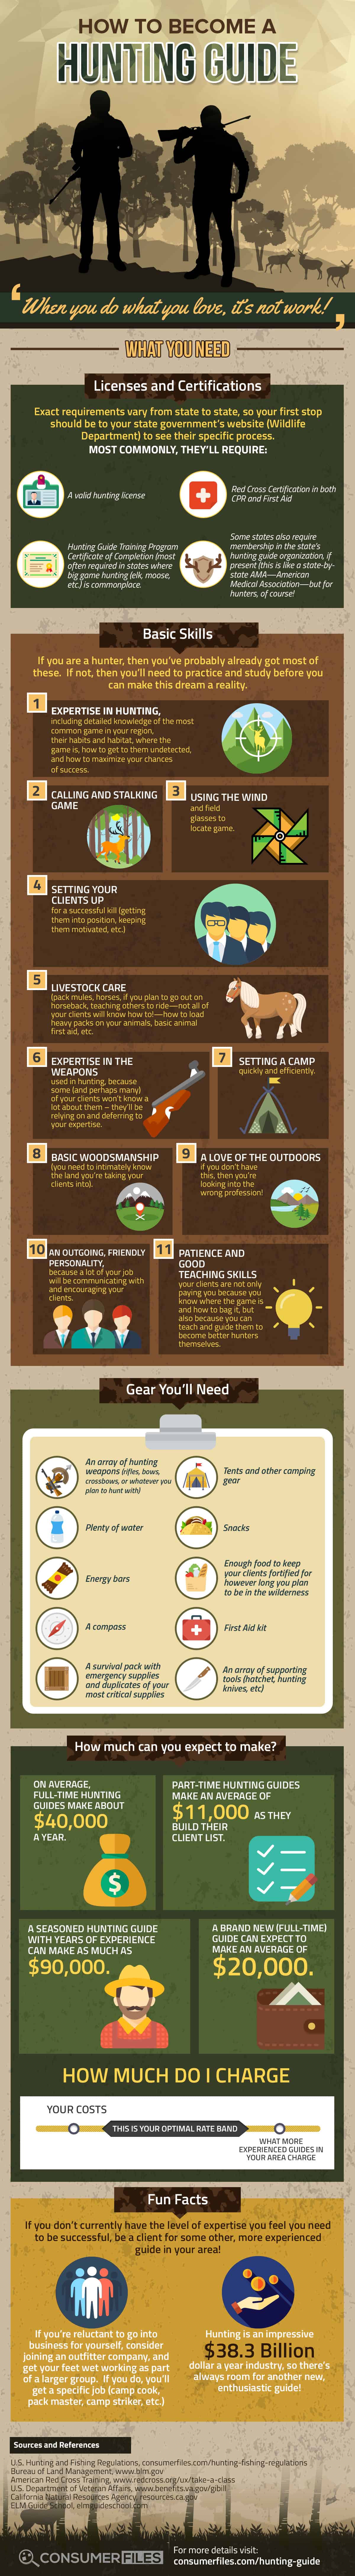 How to become a hunting guide Infographic - Consumer Files